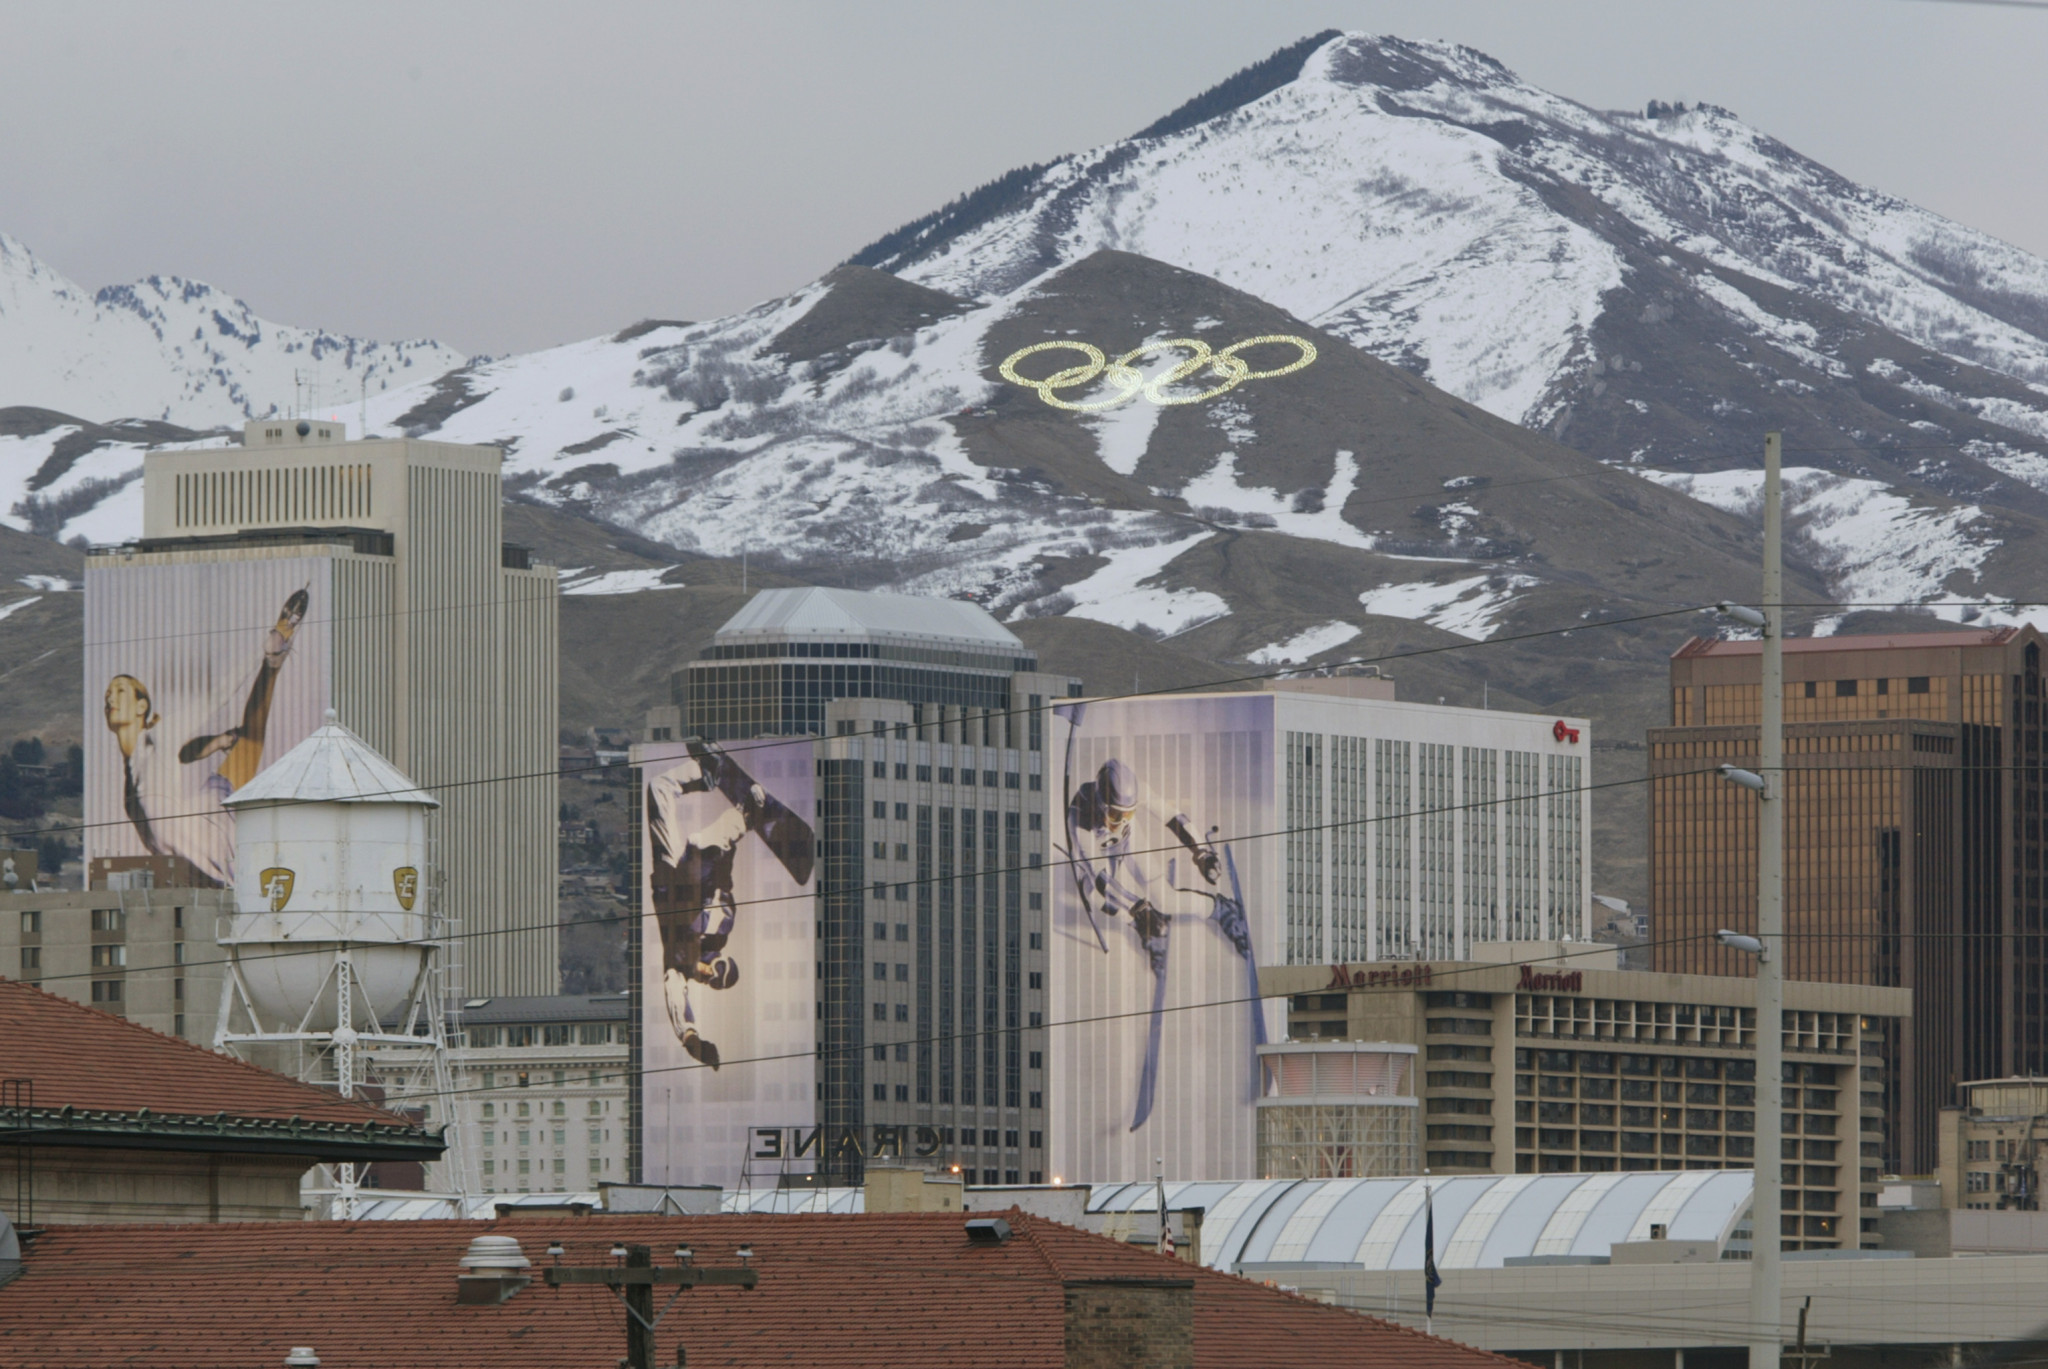 A new poll has revealed that there is strong public support for Salt Lake City to stage the Winter Olympics in either 2030 or 2034 ©Getty Images